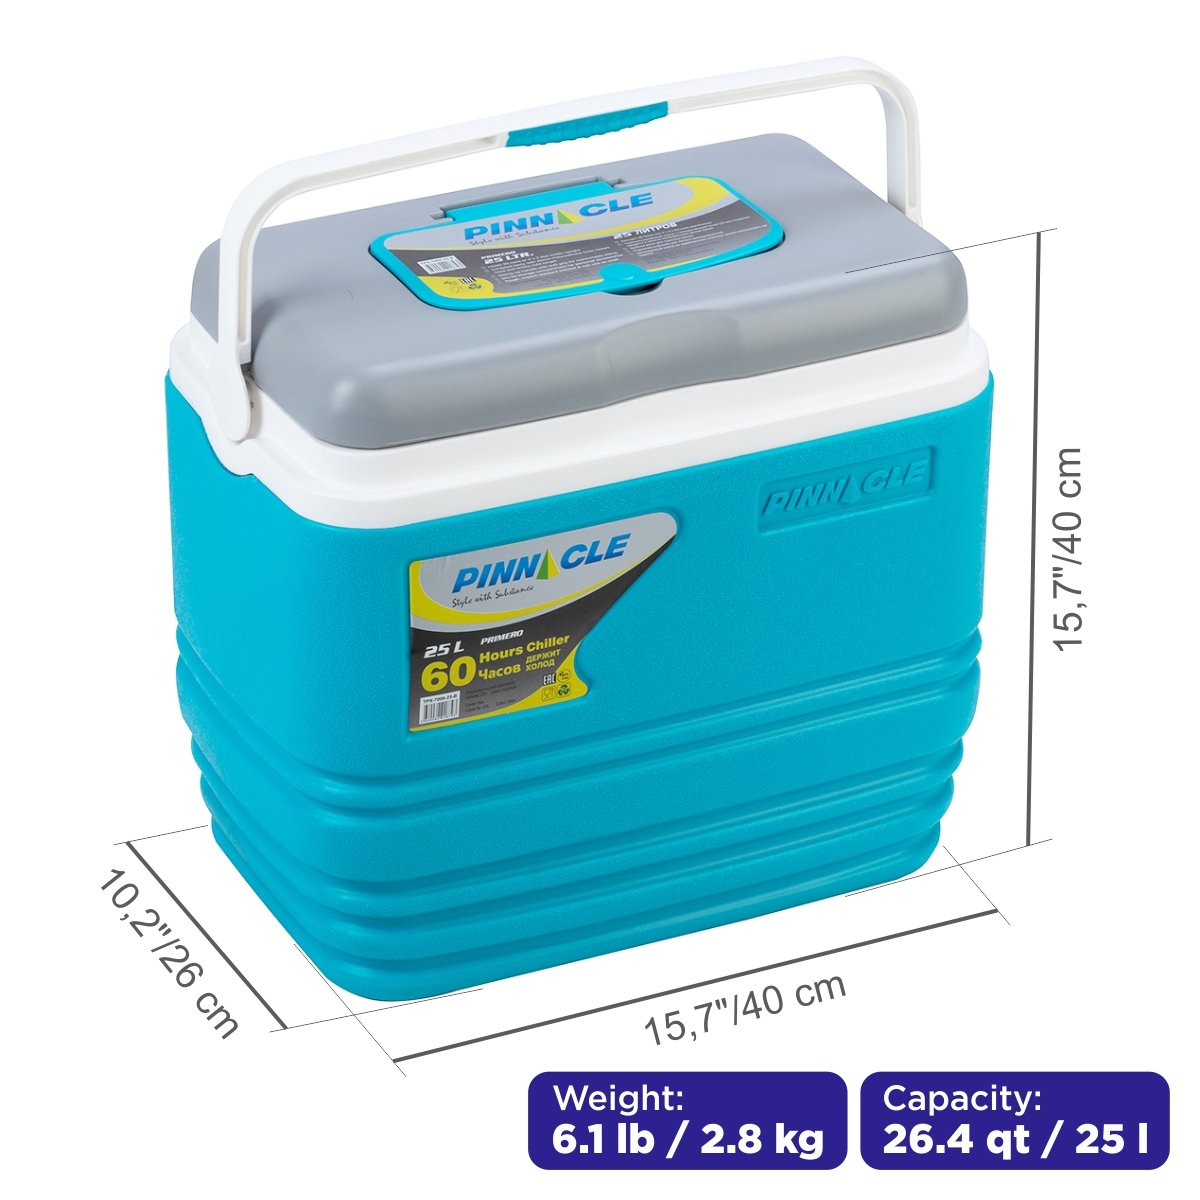 Primero Portable Camping Ice Chest with Lid Cup Holders, 26 qt is 15,7 inches long, 15.7 inches high, 10.2 inches wide, weighing only 6 lbs